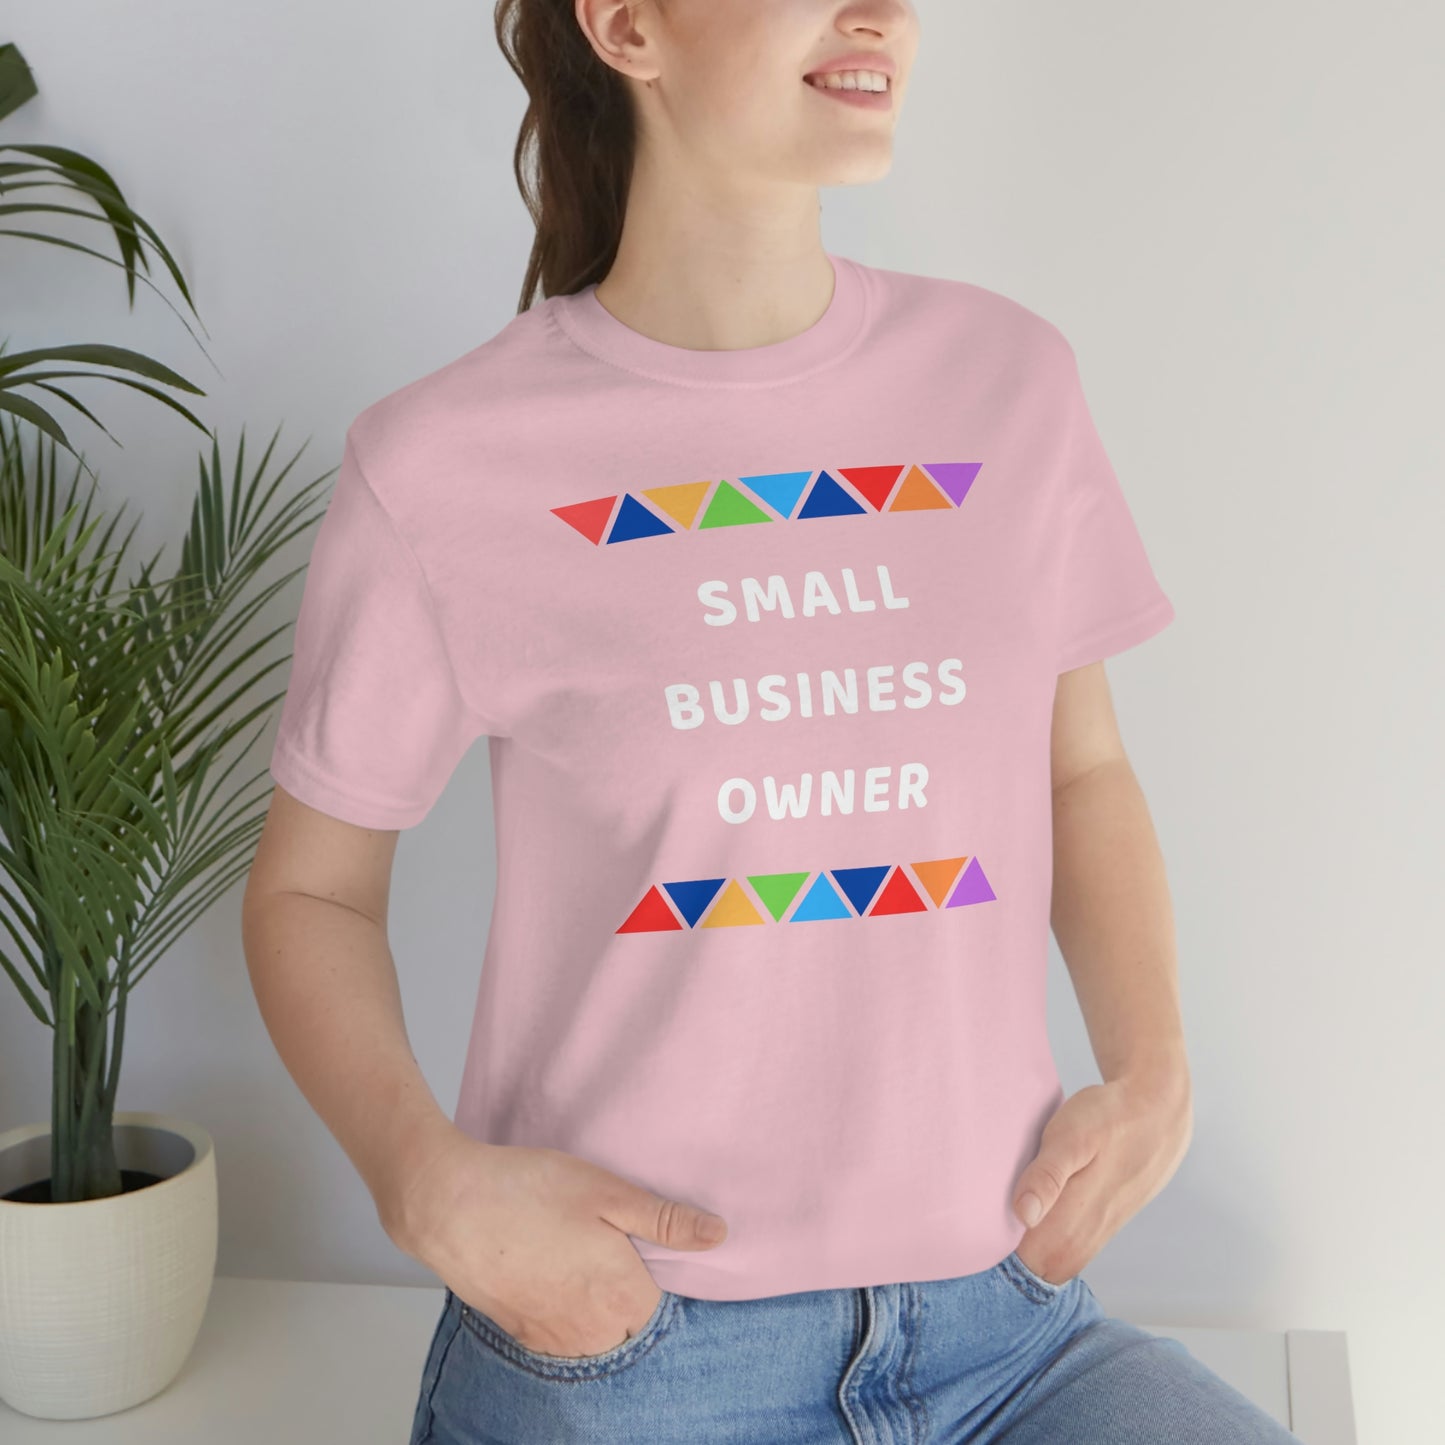 small business shirt, business owner gift, small business t-shirt, business owner t shirt, startup business shirt,